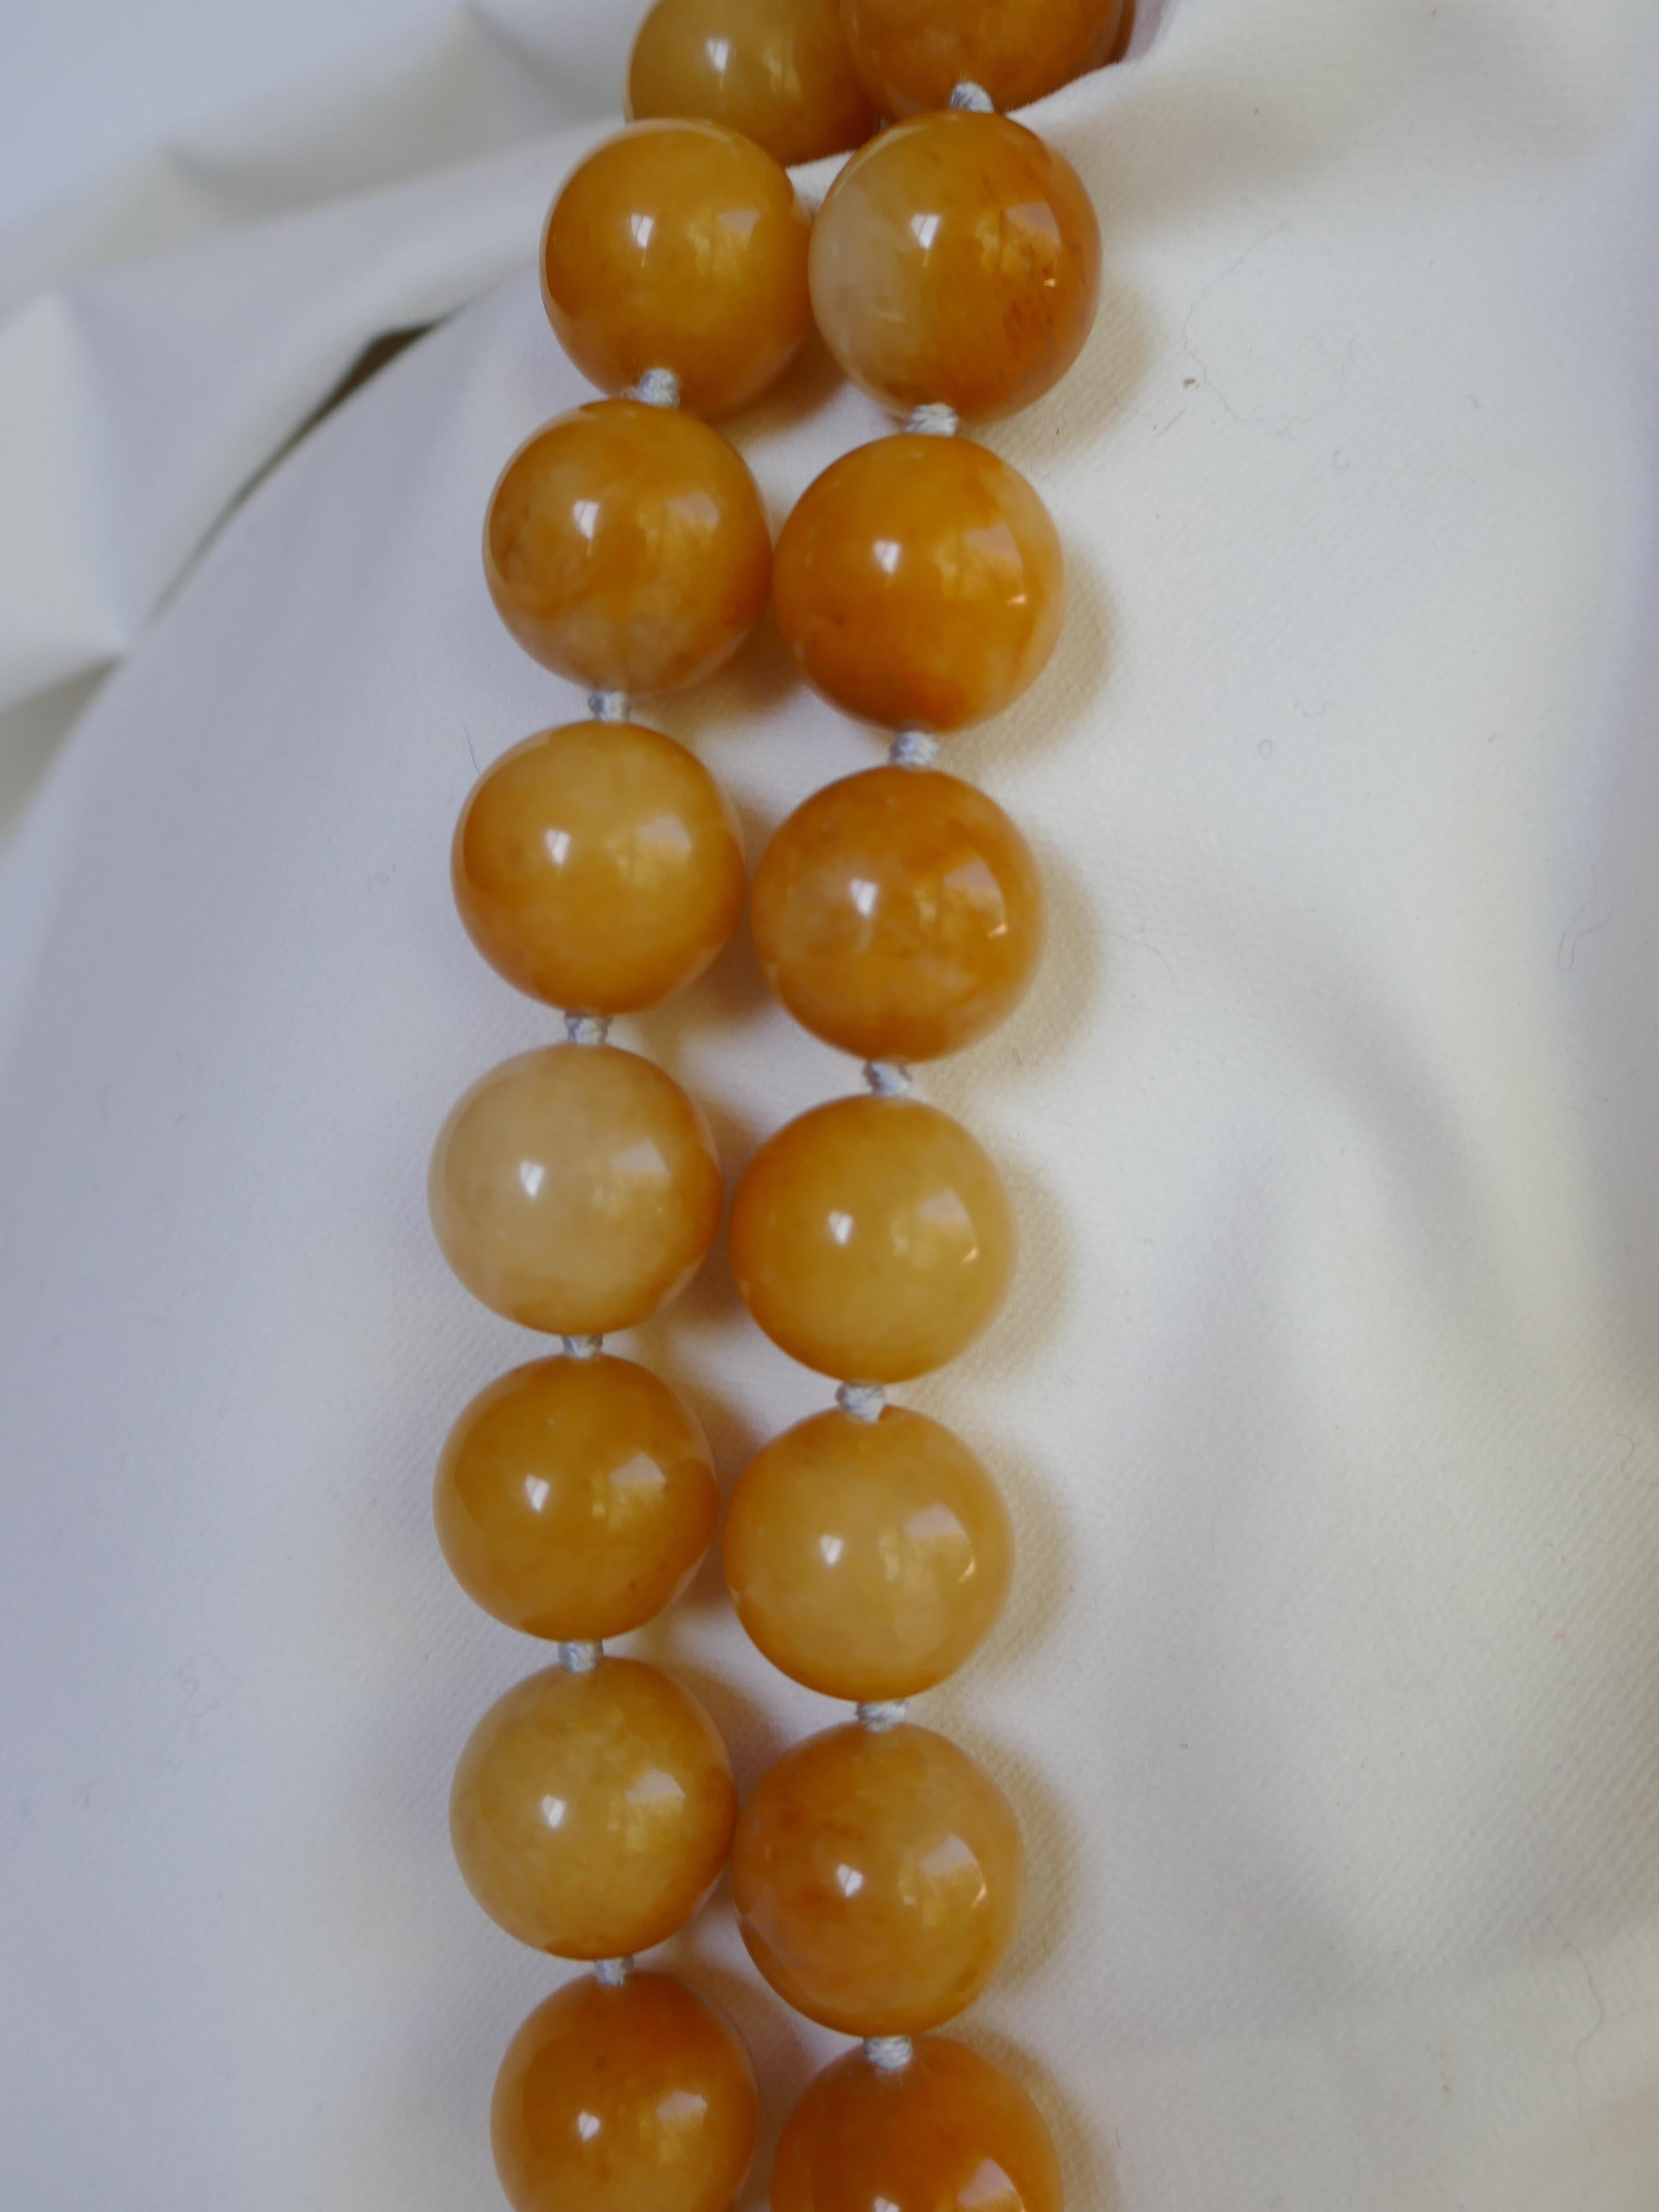 Was lucky to find a few strand of yellow jade, as most of all the pieces of yellow jade were sold. The beads on this necklace are 16mm versus the last on which was sold. This two strand necklace is made of 16mm yellow jade (mustard yellow) and